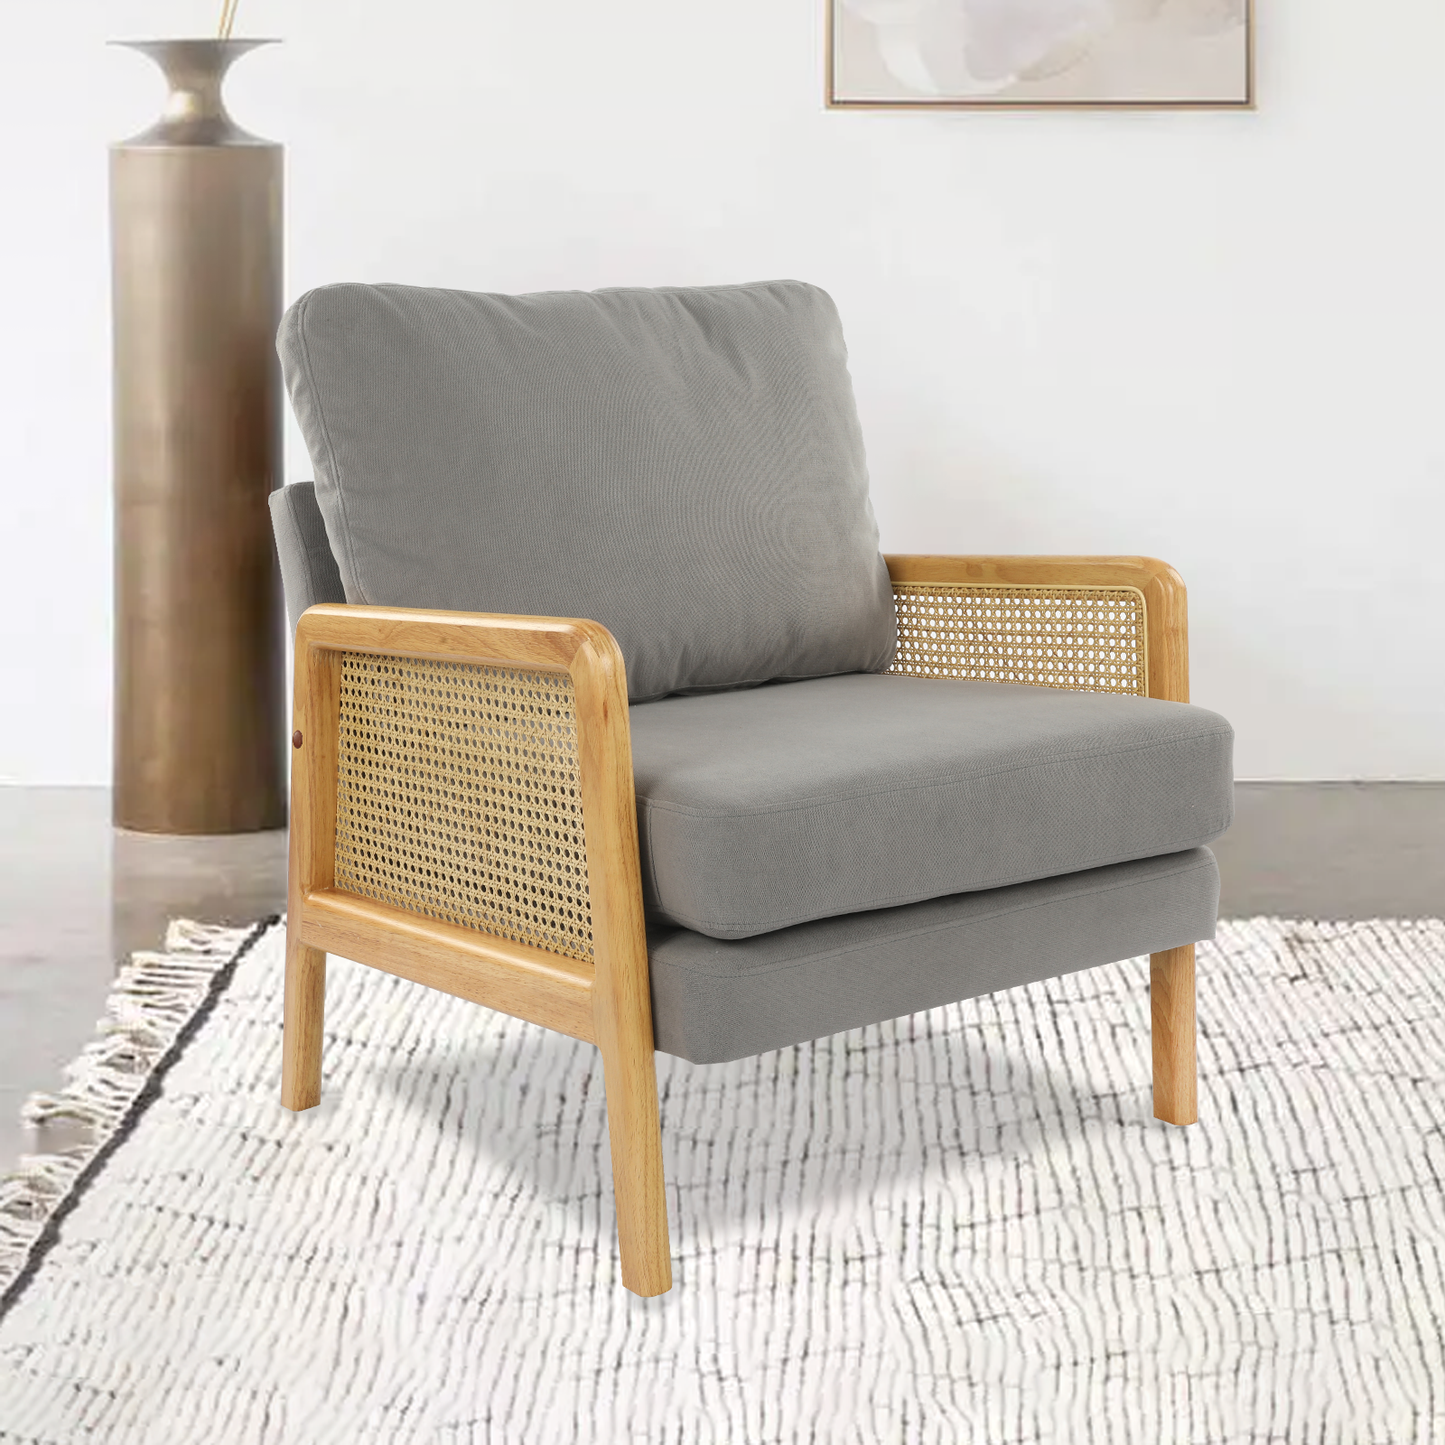 Mid Century Modern Accent Chair with Solid Wood Frame, Upholstered Living Room Lounge Arm Chair